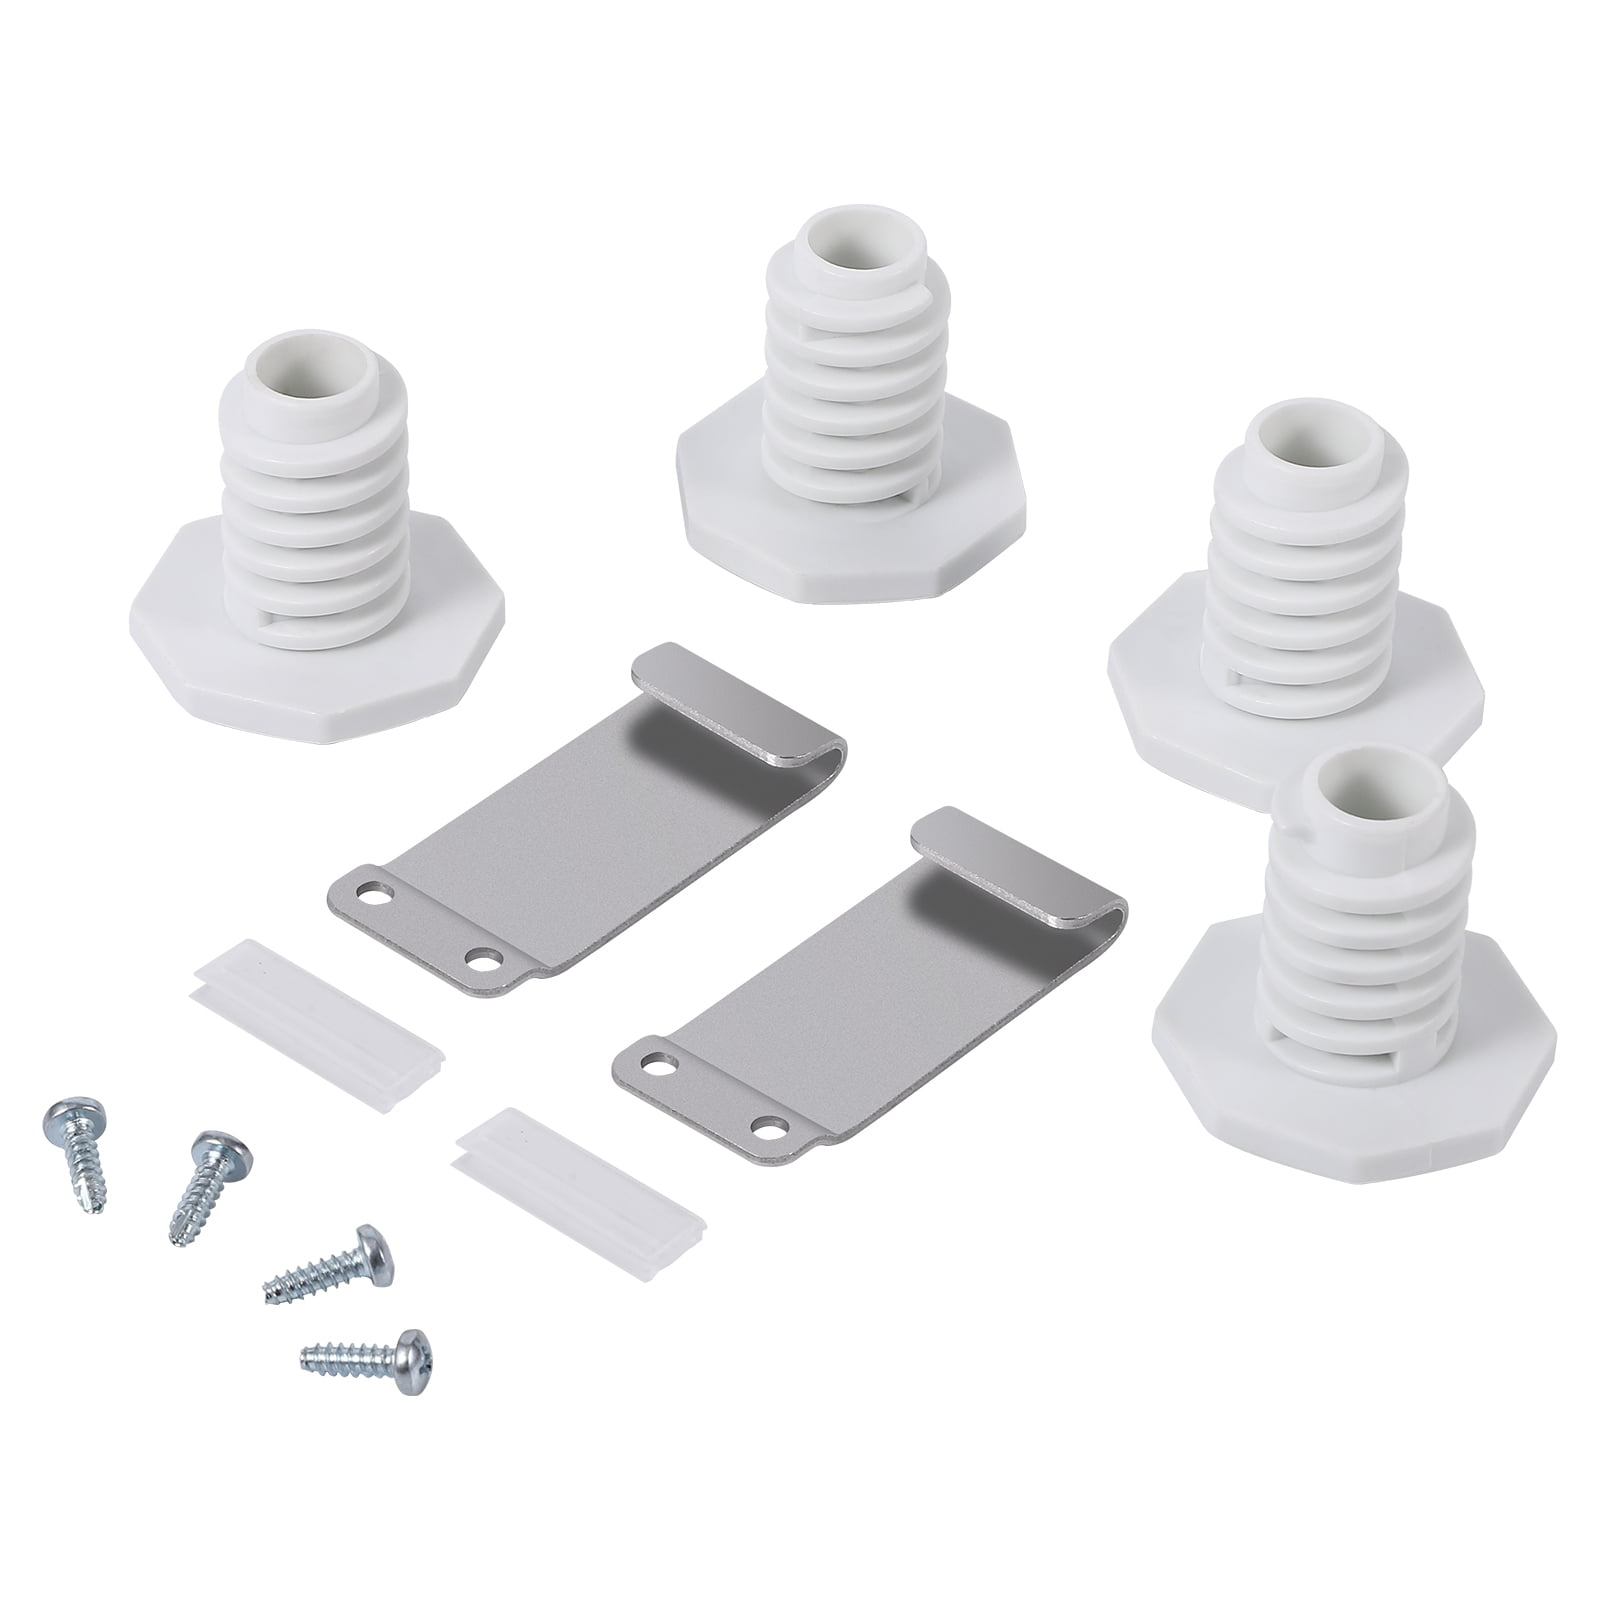 W10869845 Dryer Stacking Kit - Compatible for Whirlpool Dryer & Washer, Replaces W10298318 AP6047938 PS3407625 - Walmart.com